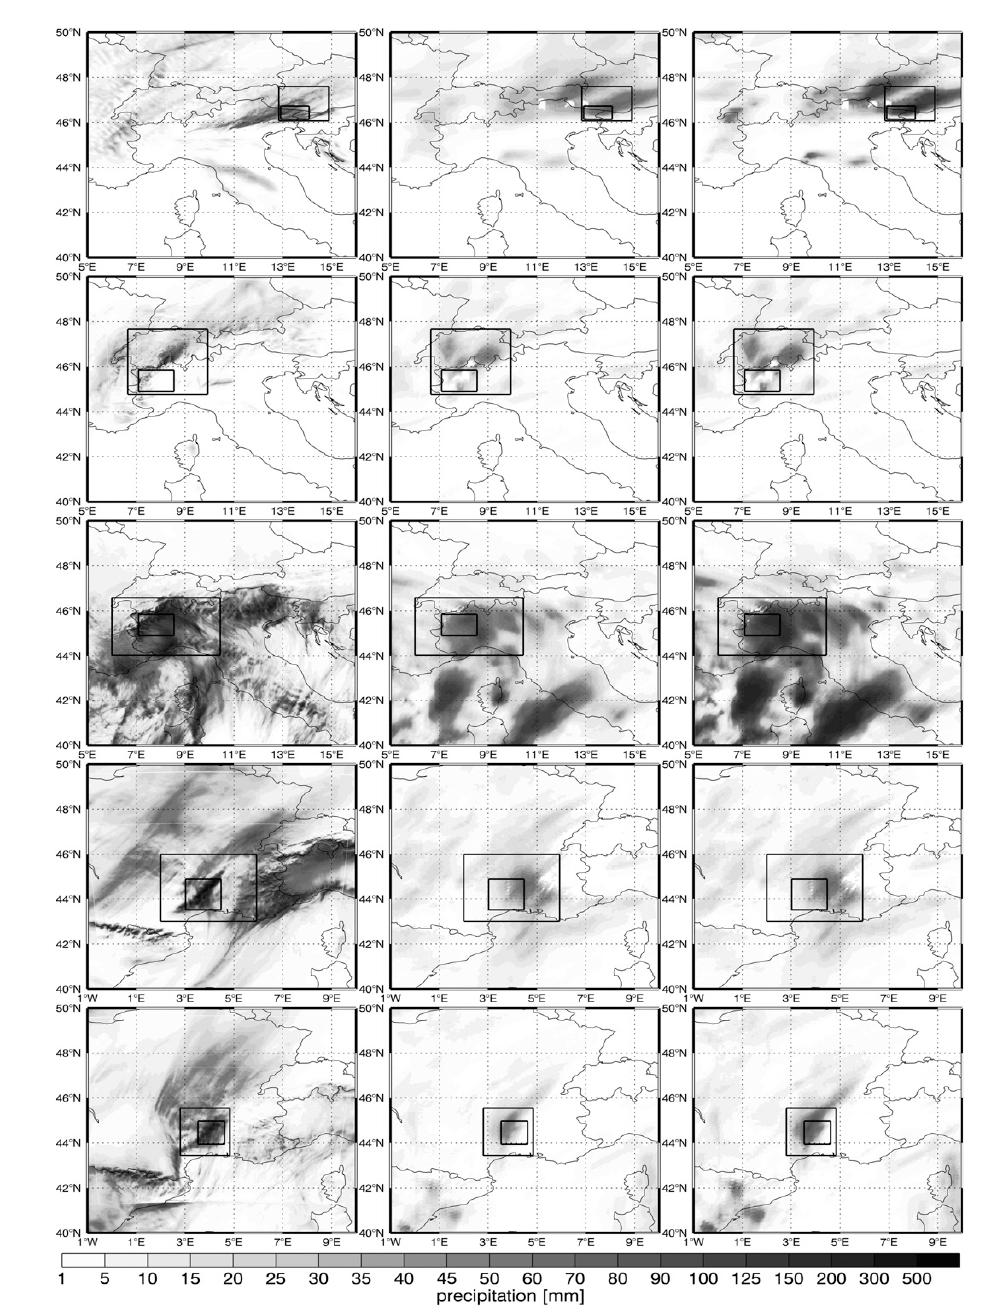 Accumulated rainfall maps for each five storm event. WRF maps (left), CMOPRH maps (middle), the adjusted CMORPH maps (right). The area encompassed by the outer rectangle box is the fitting domain; the area encompassed by the inner rectangle box is the radar domain for the error analyses.